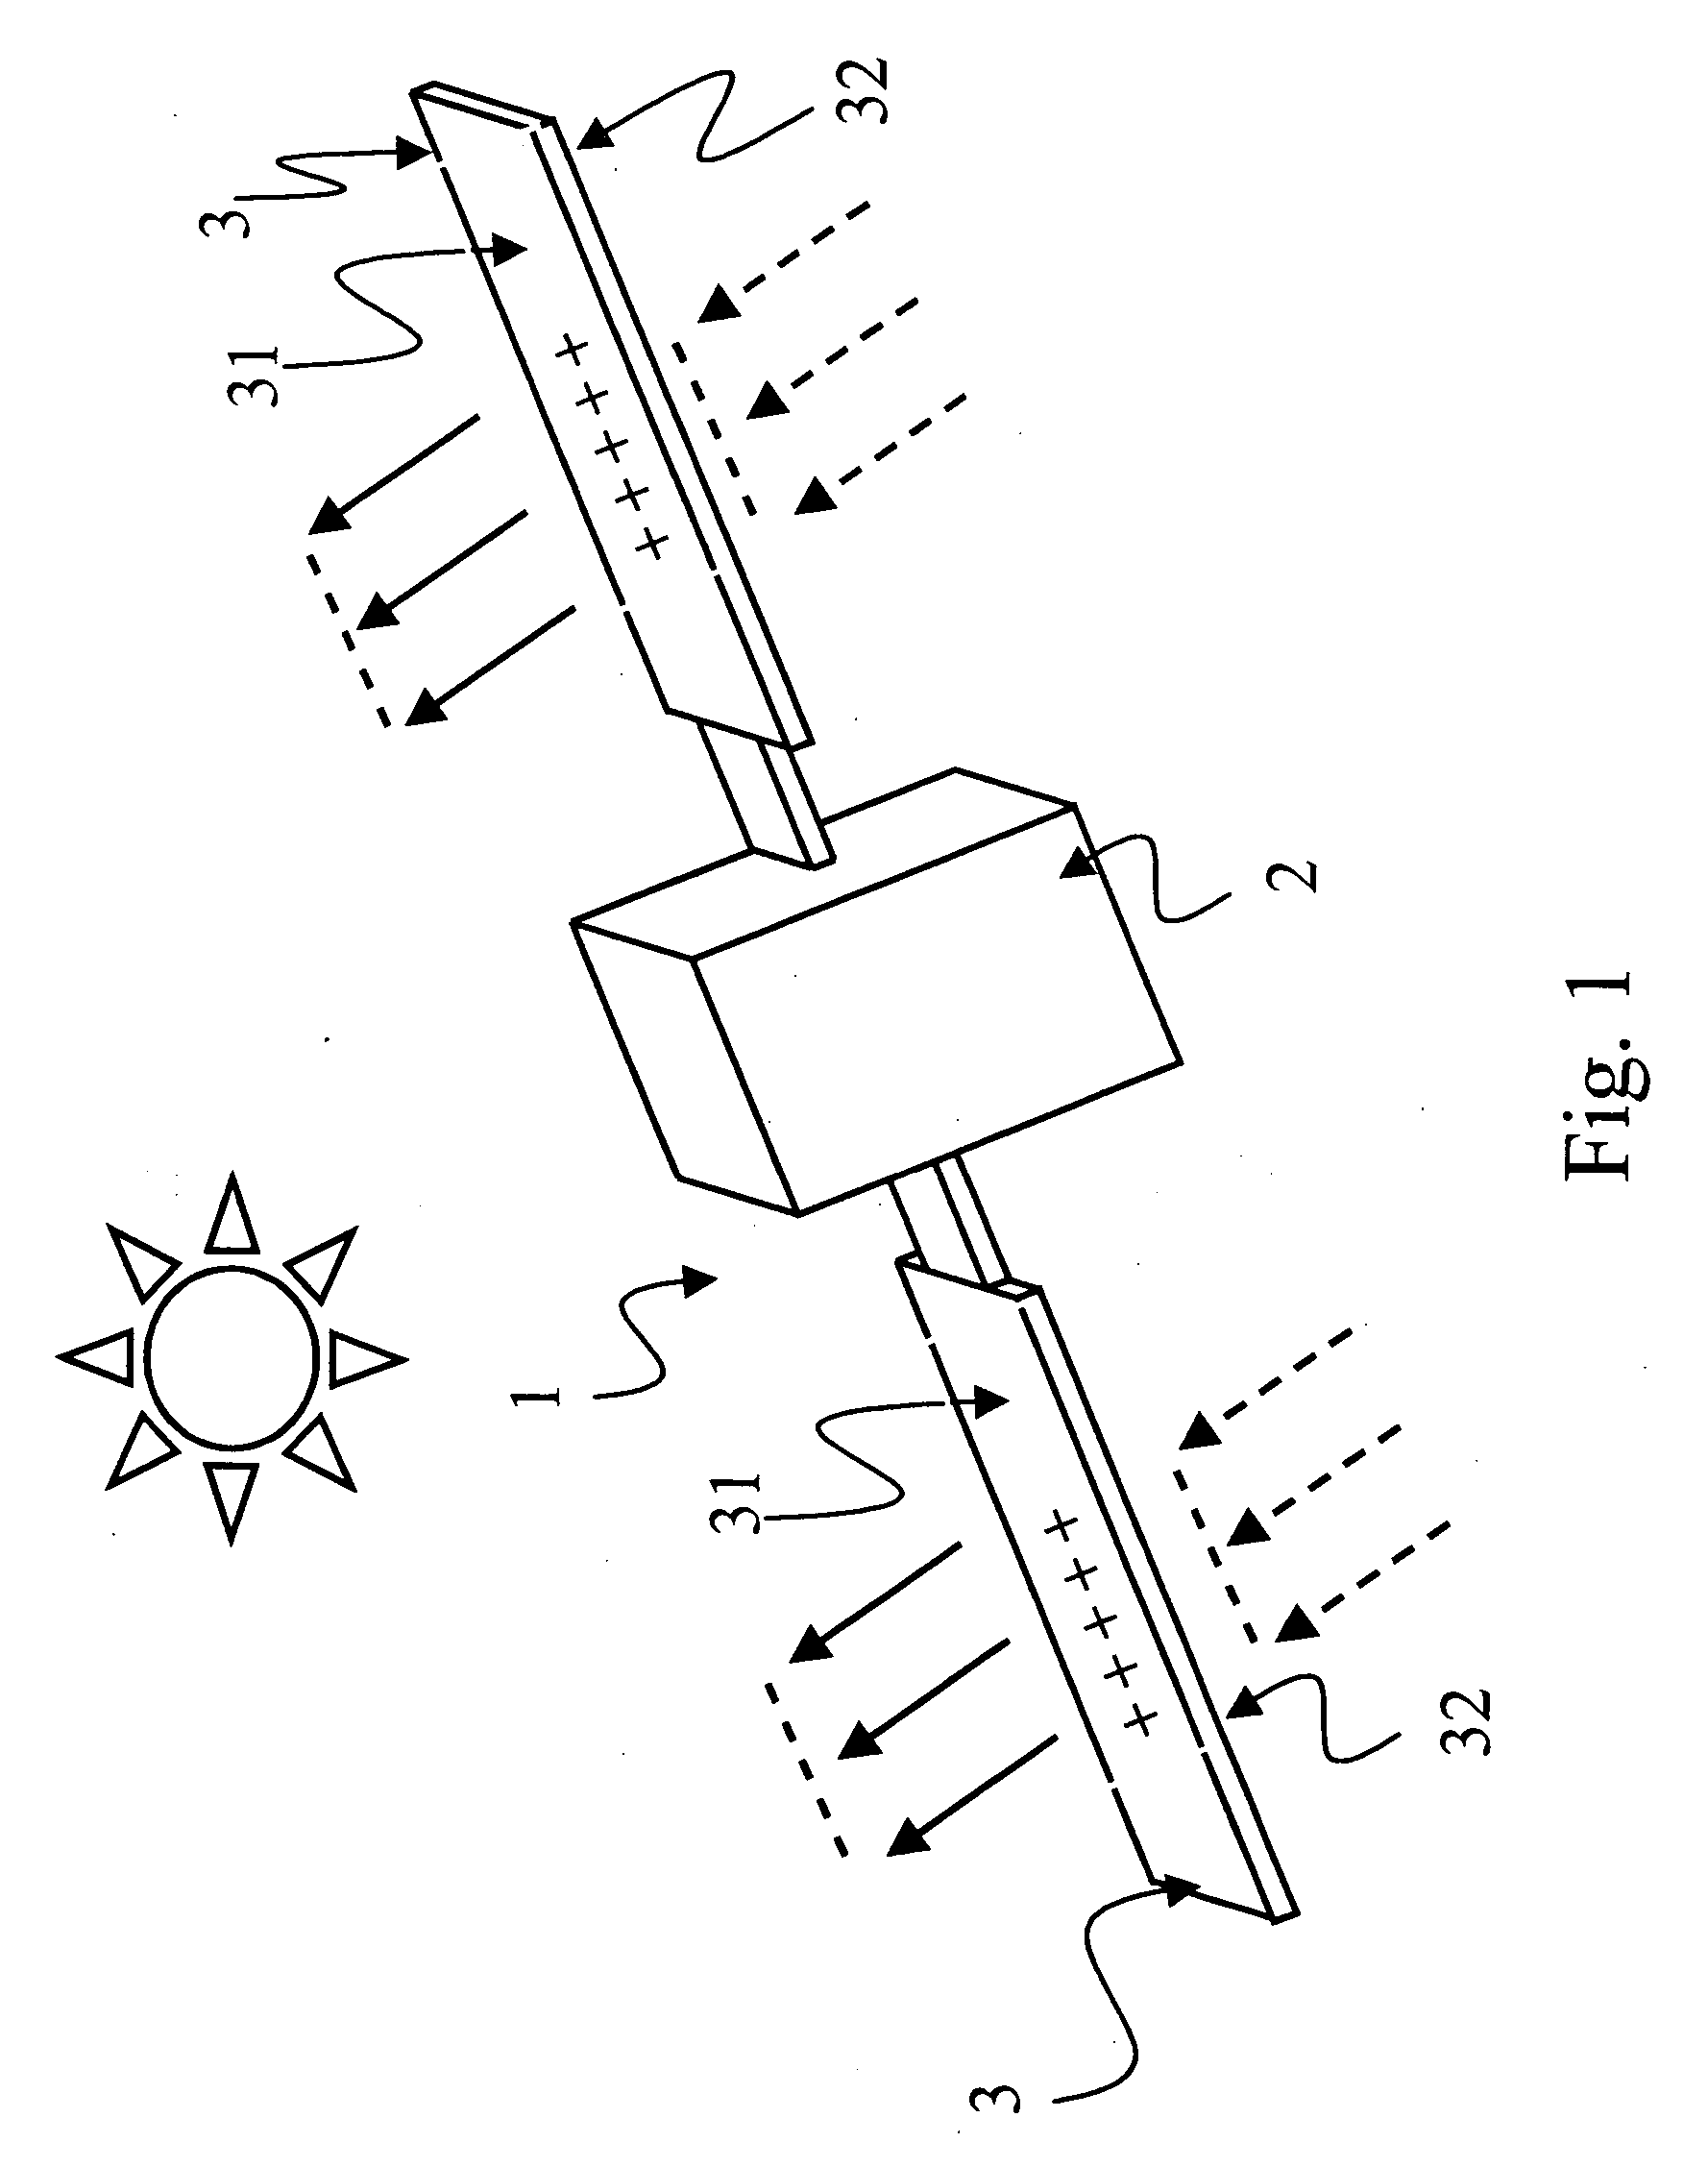 Coating for prevention of electrostatic discharge within an equipment in a spatial environment